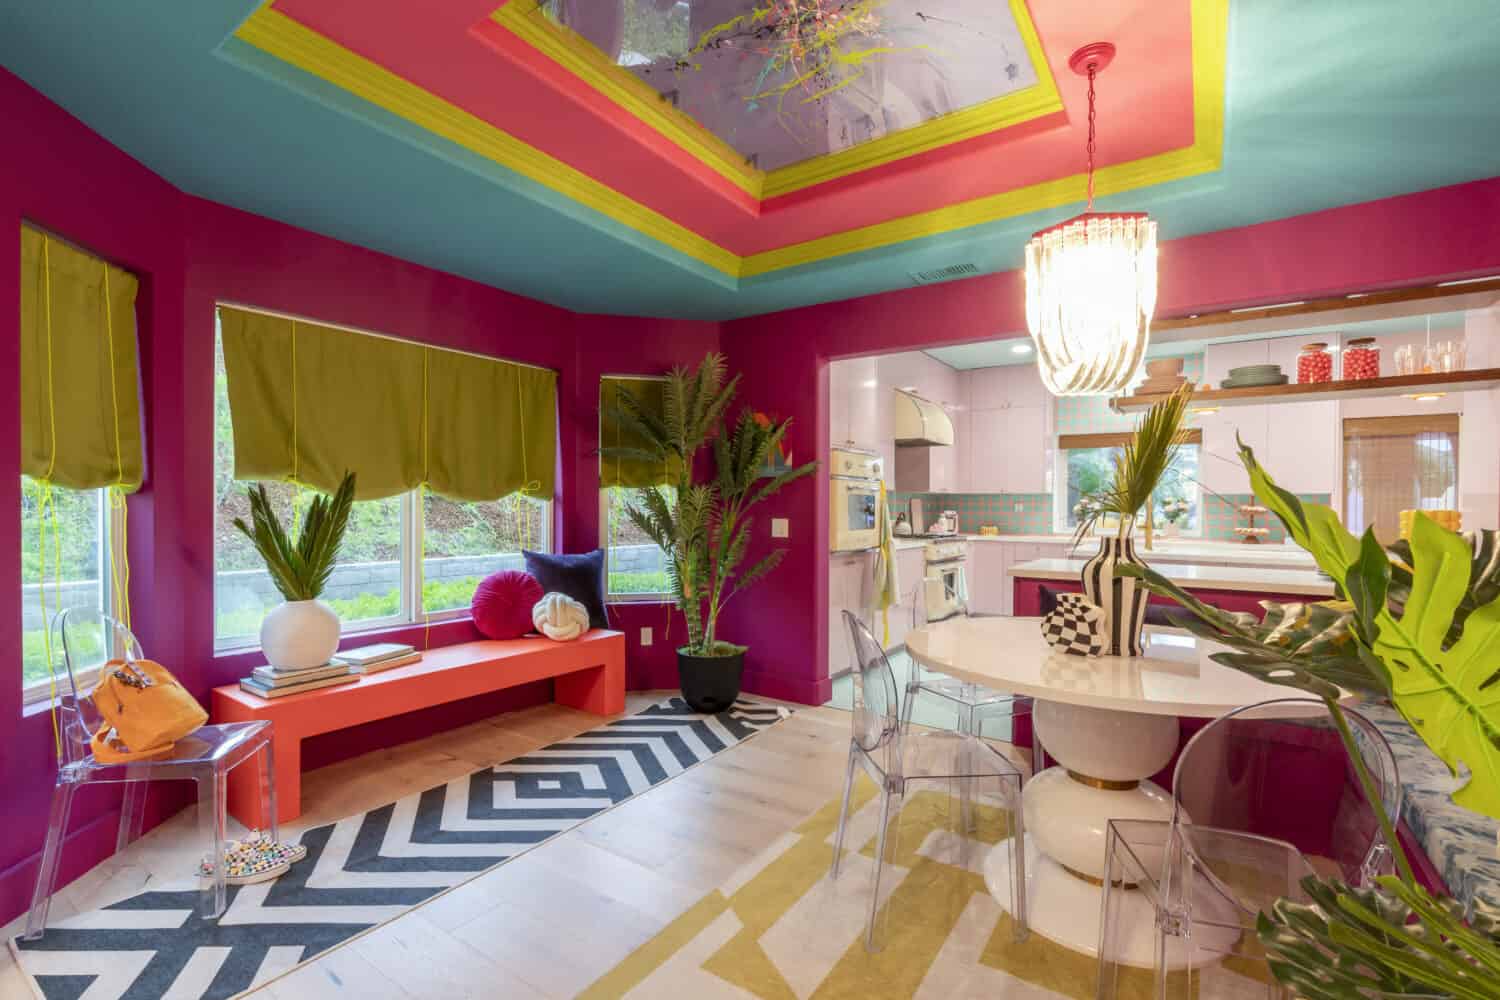 A look into the Barbie house in the show, Barbie Dreamhouse Challenge (Credits: HGTV)